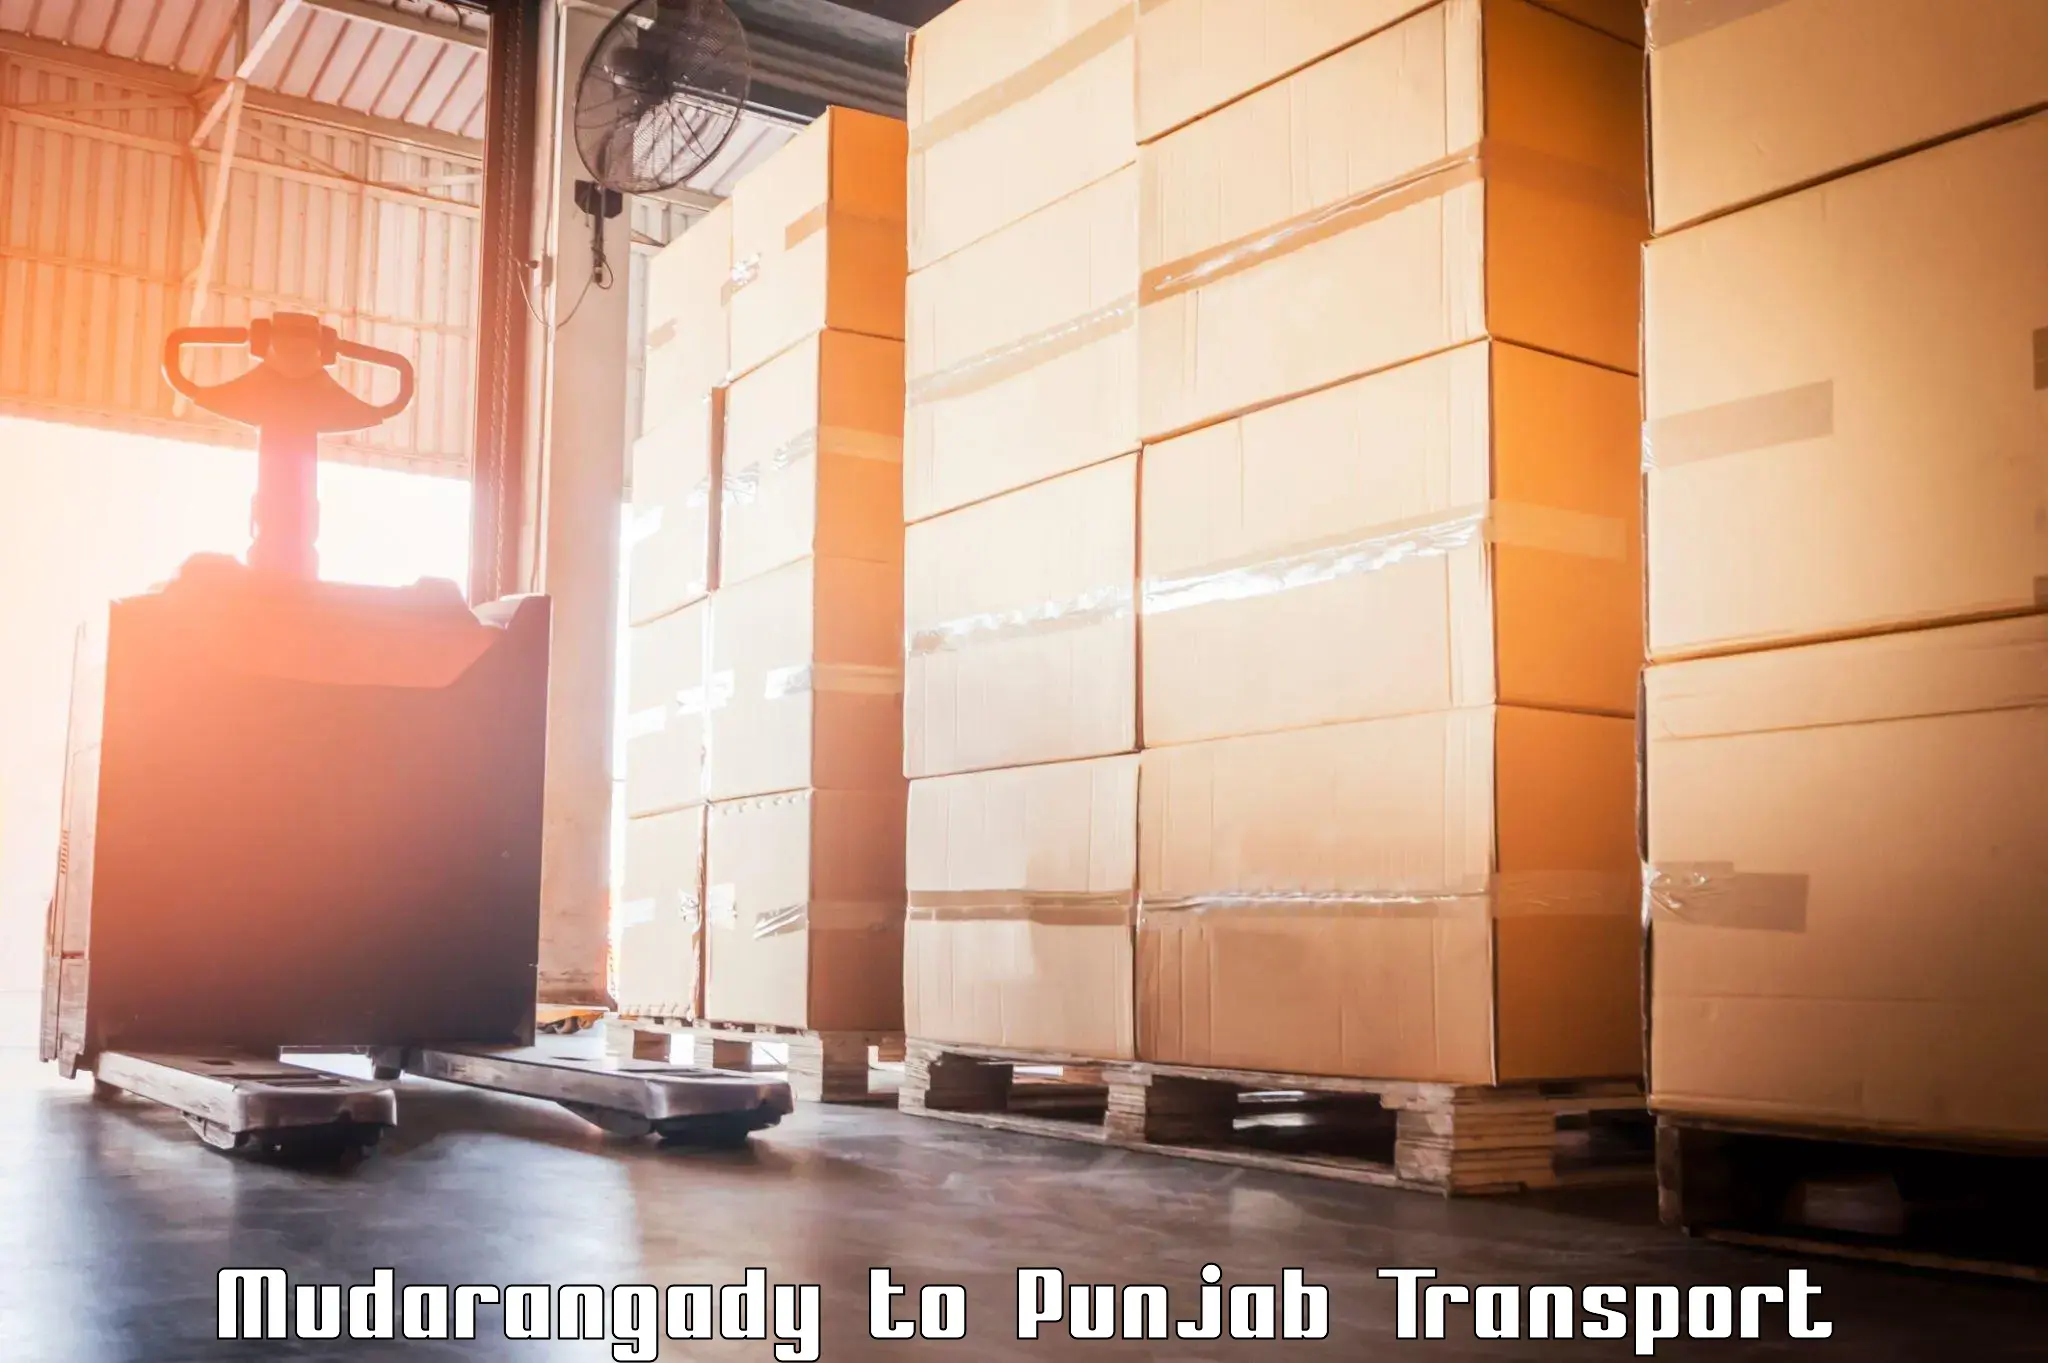 Nationwide transport services Mudarangady to Punjab Agricultural University Ludhiana